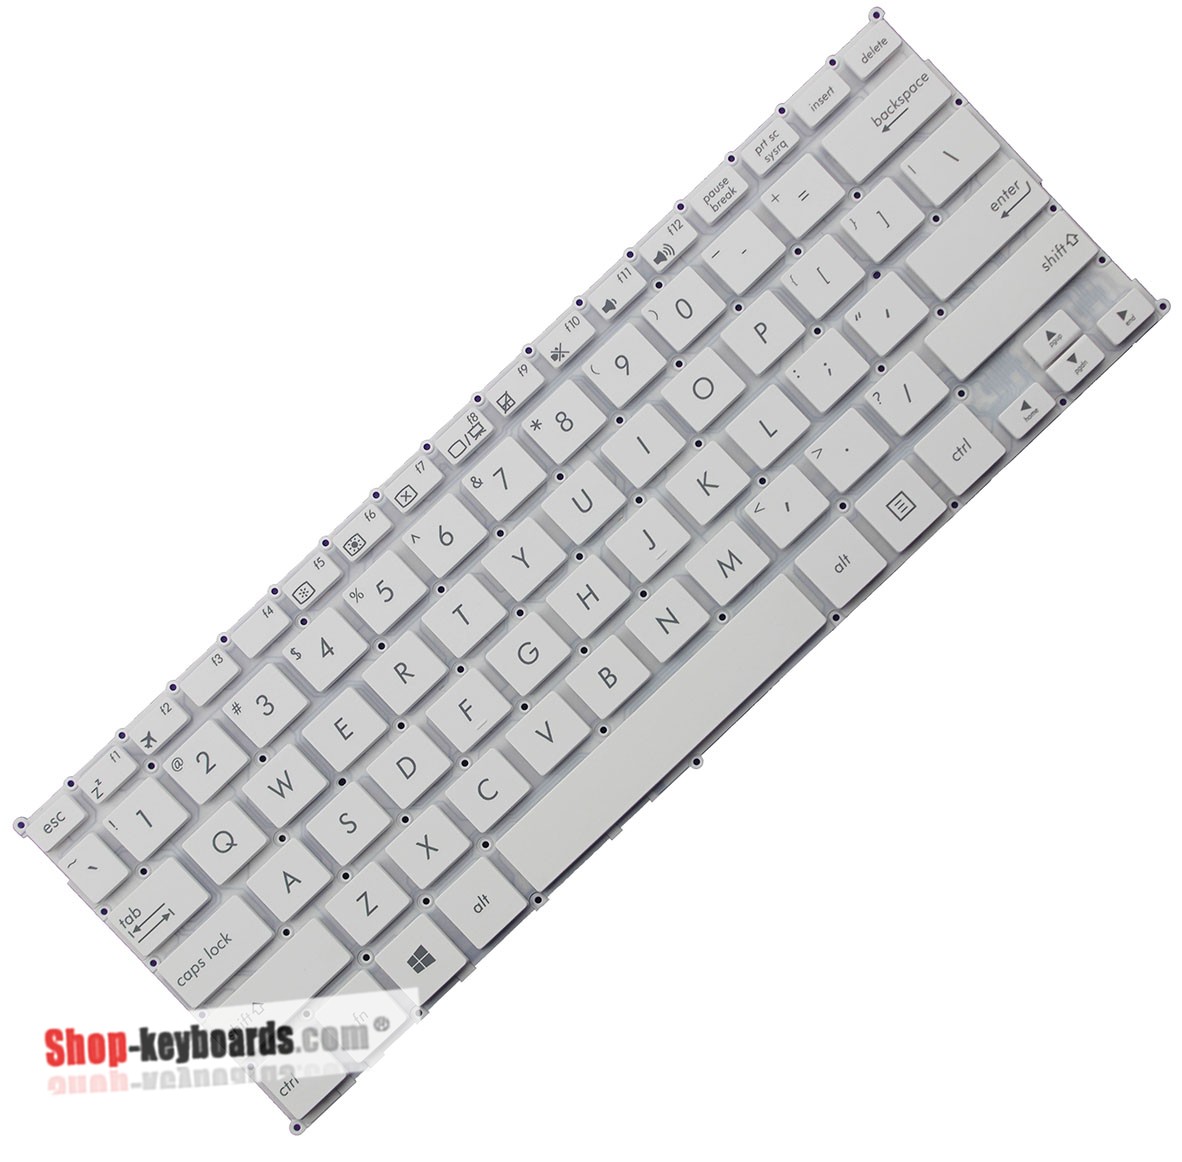 Asus 0KNL0-1120FR00 Keyboard replacement